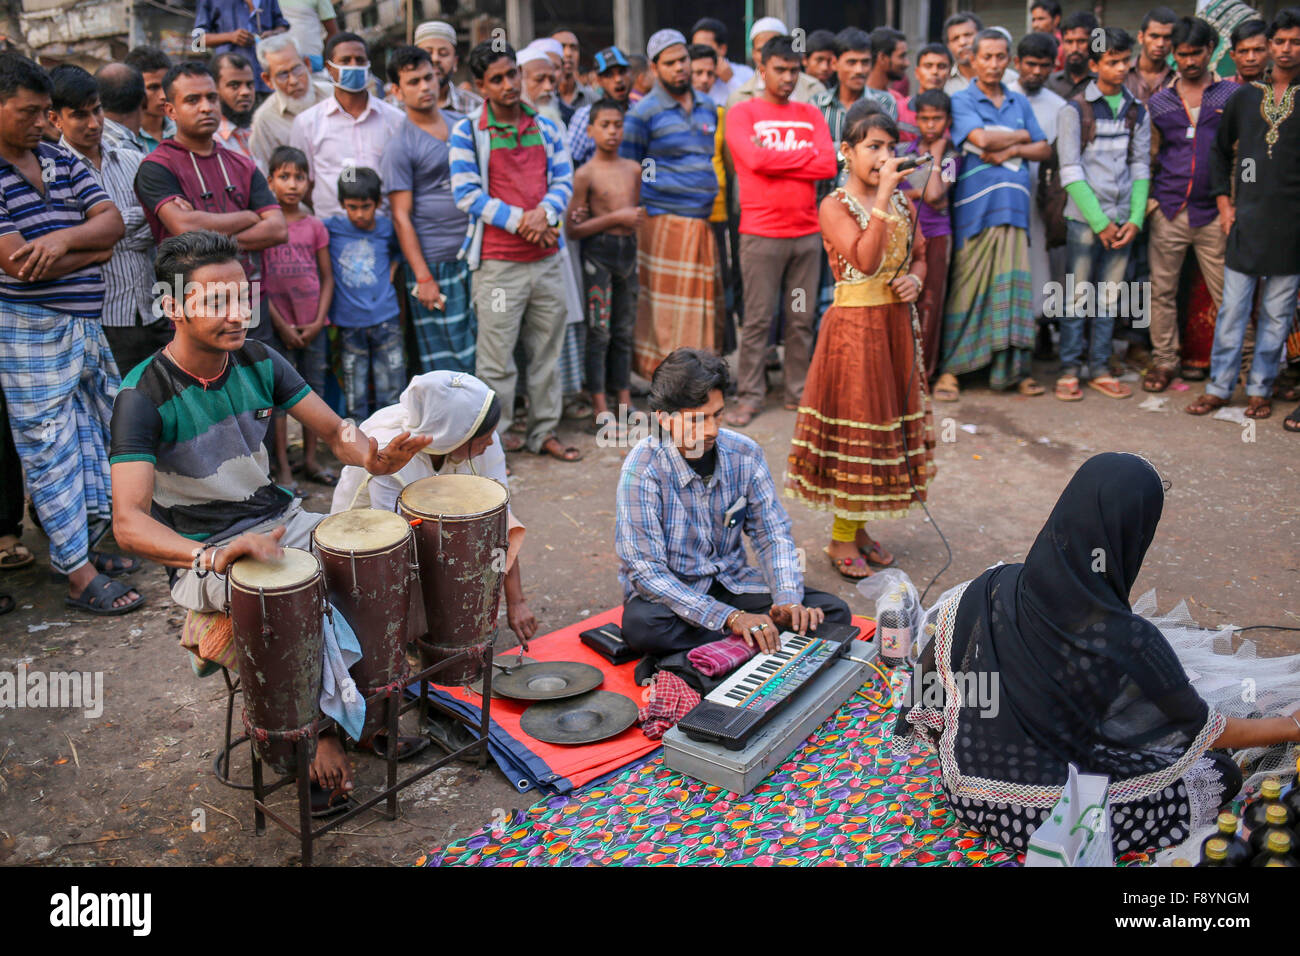 Dhaka, Bangladesh. 12th Dec, 2015. Street vendor selling medicine to the poor poeple in Dhaka. To get public attention they arranges open air traditional music. © Mohammad Ponir Hossain/ZUMA Wire/Alamy Live News Stock Photo